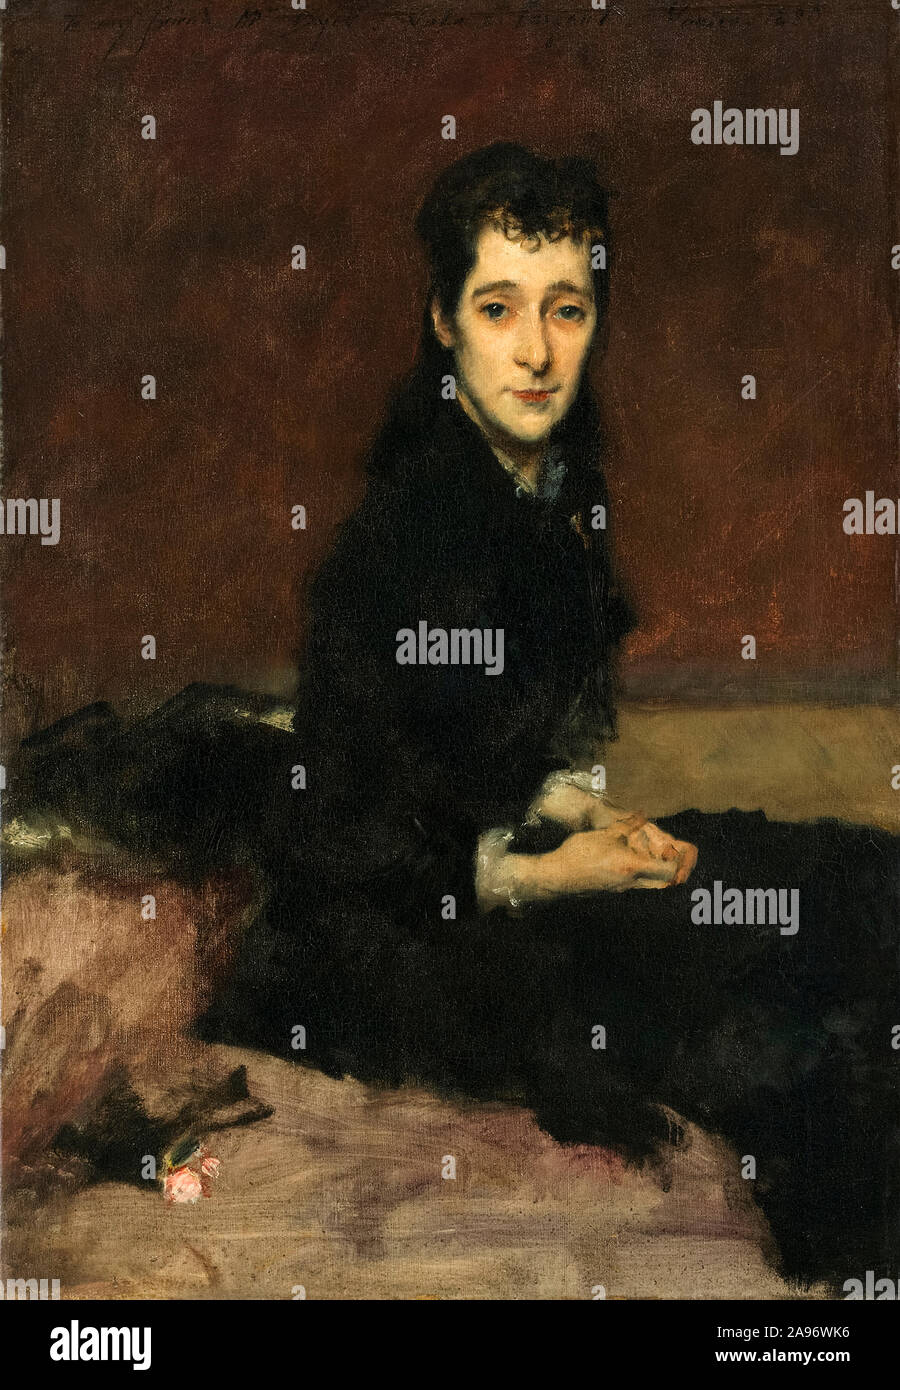 John Singer Sargent, Mrs Charles Gifford Dyer, (Mary Anthony), portrait painting, 1880 Stock Photo